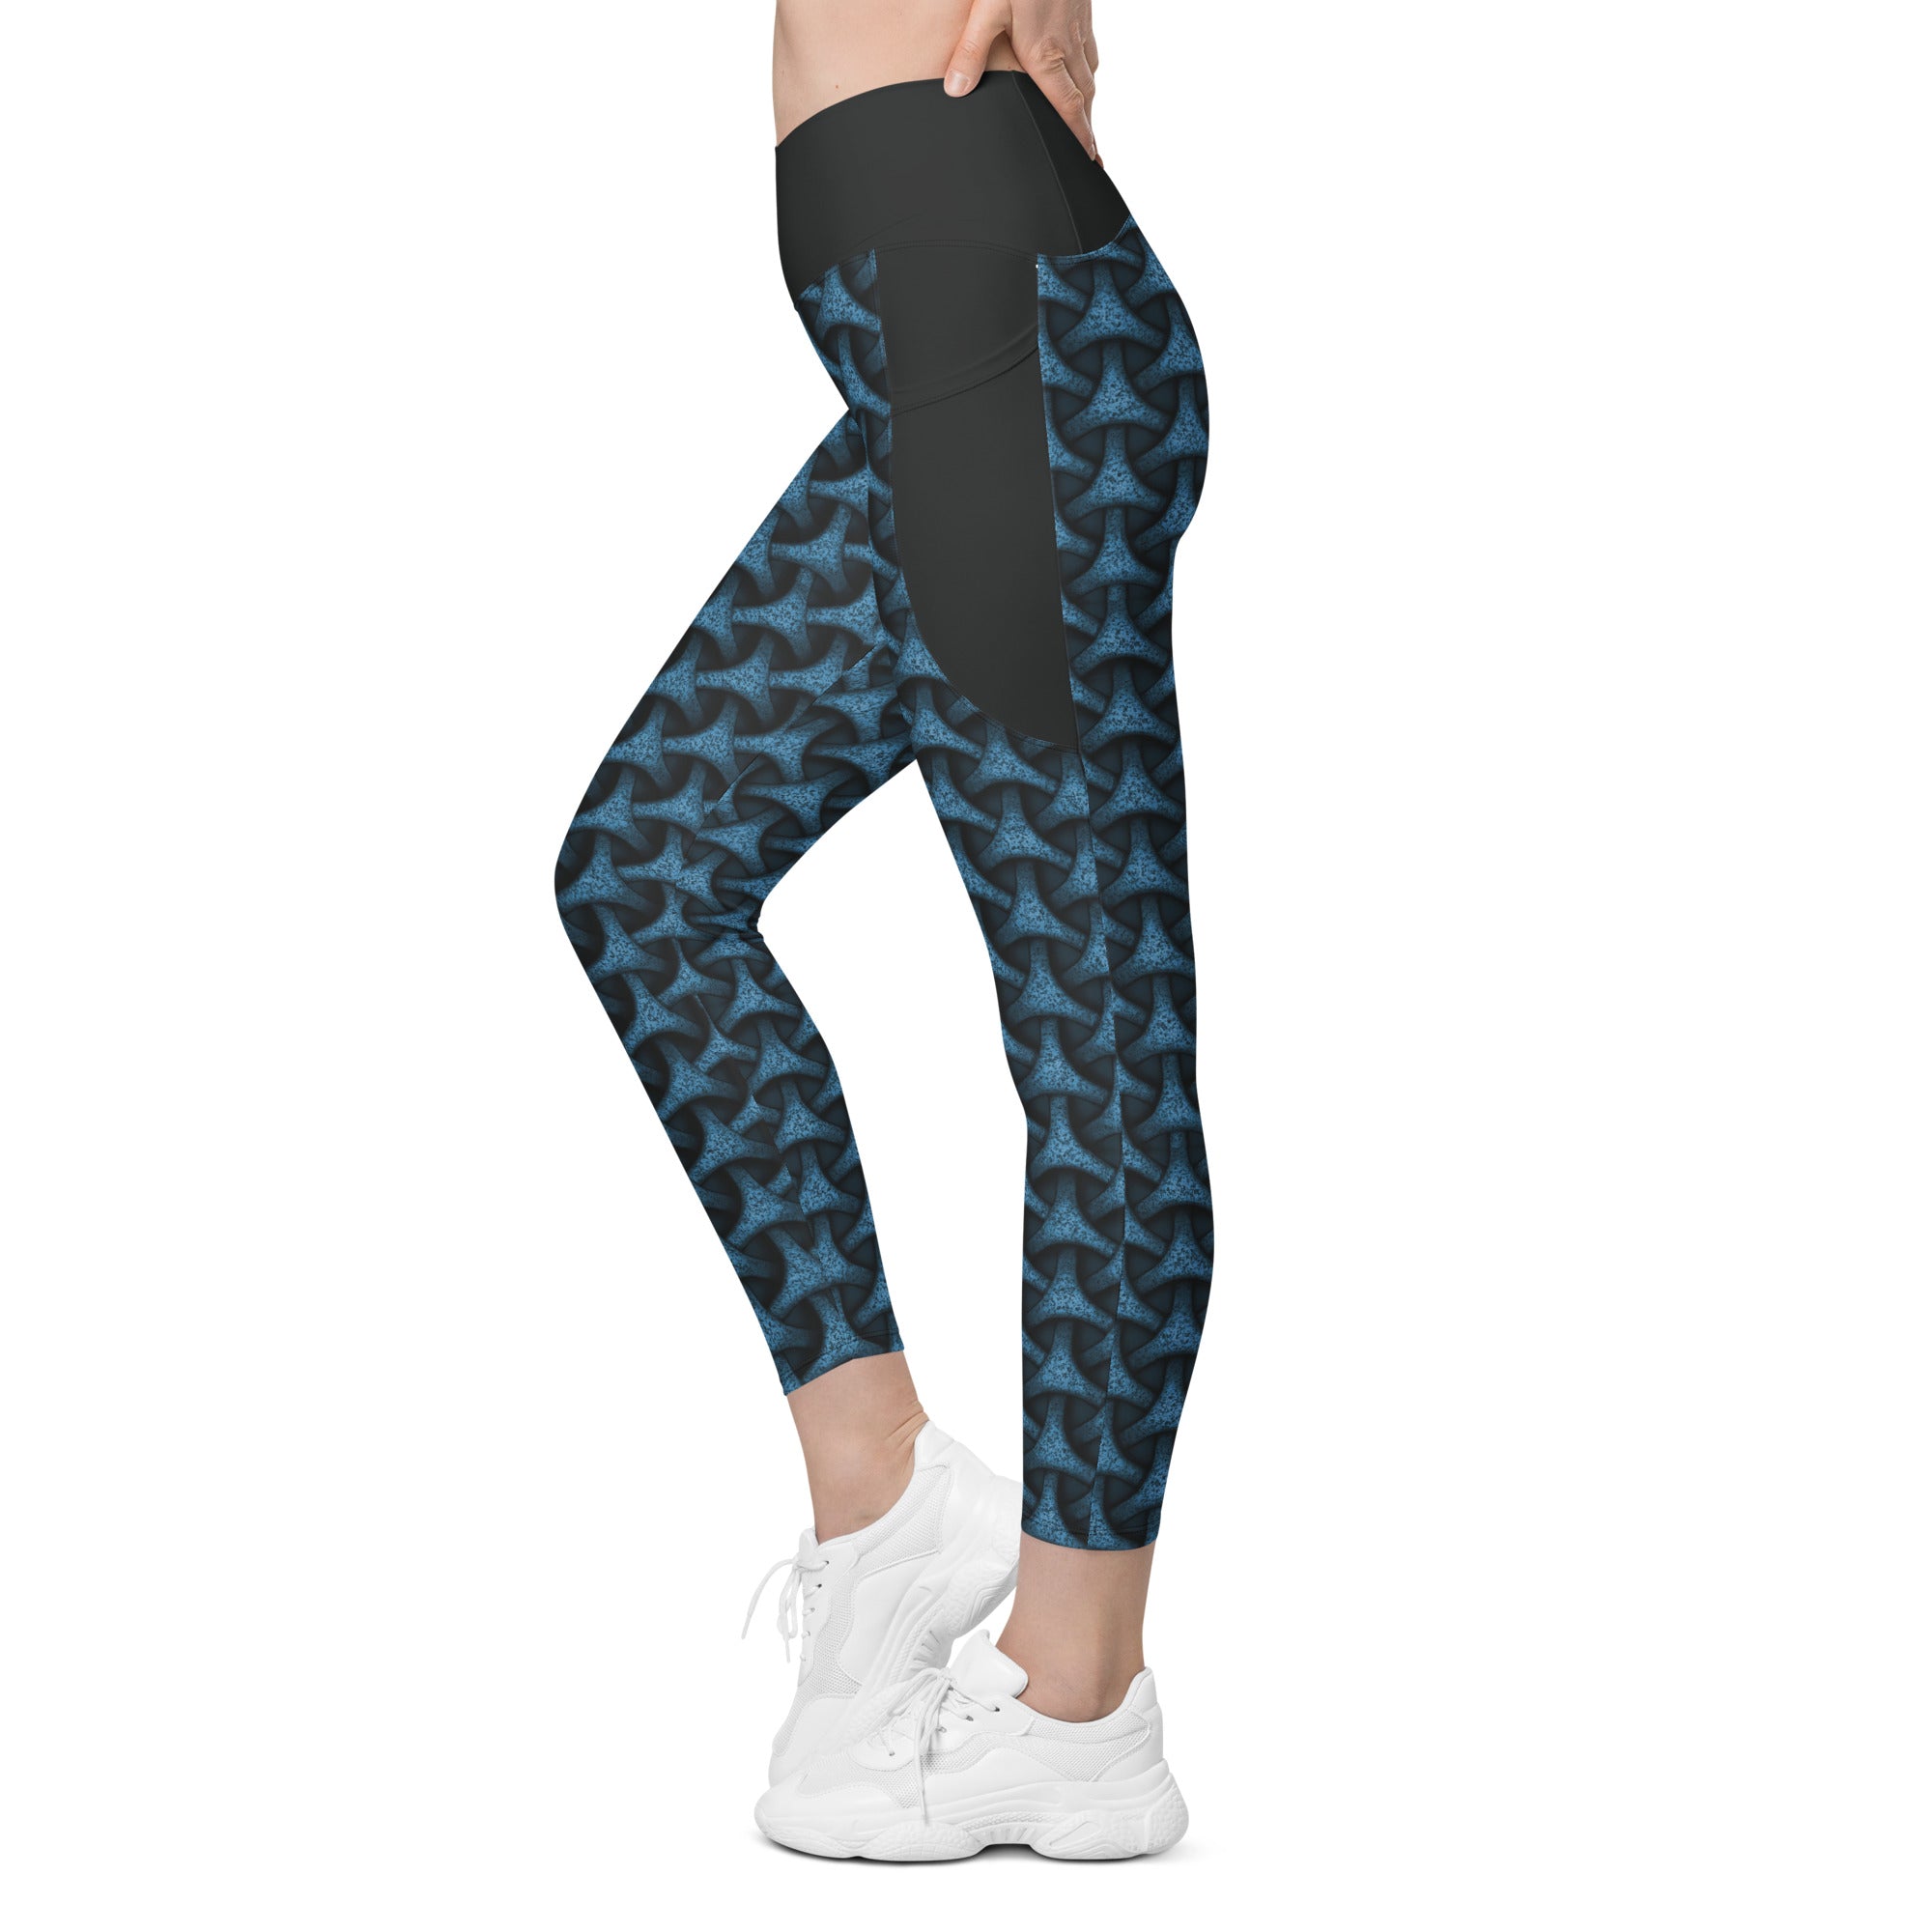 Galactic Glow Leggings paired with a workout top for an interstellar gym session.